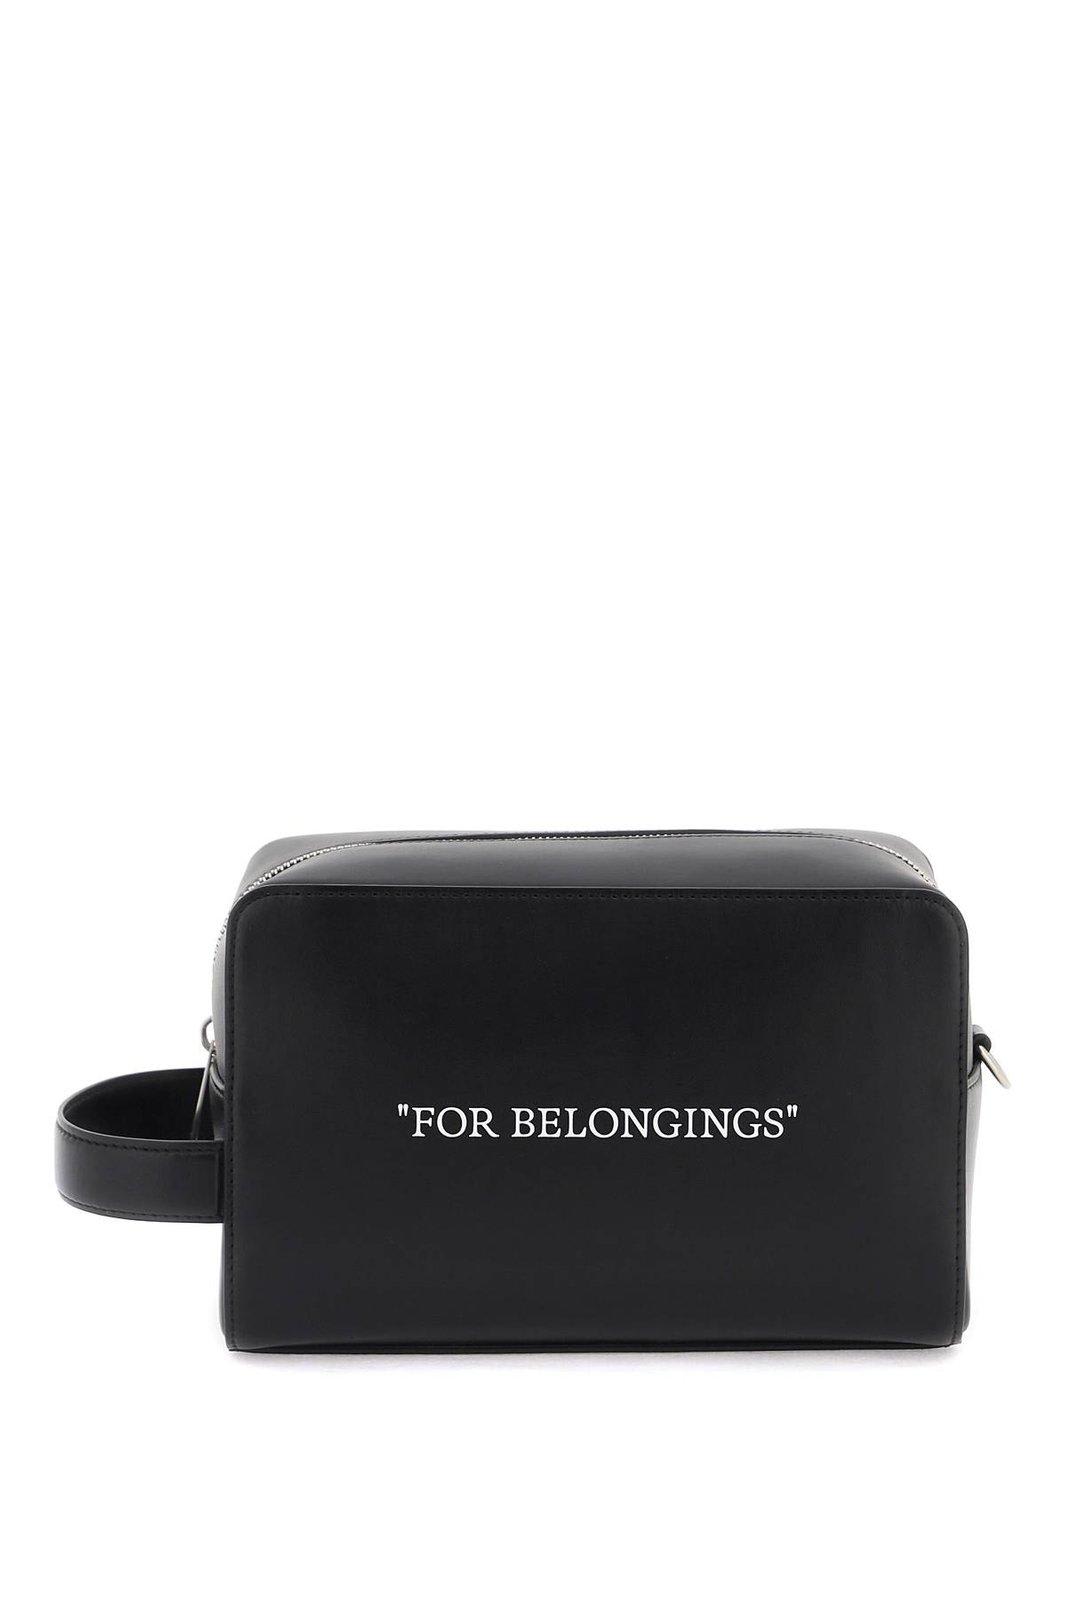 OFF-WHITE QUOTE-PRINT ZIP-UP WASH BAG